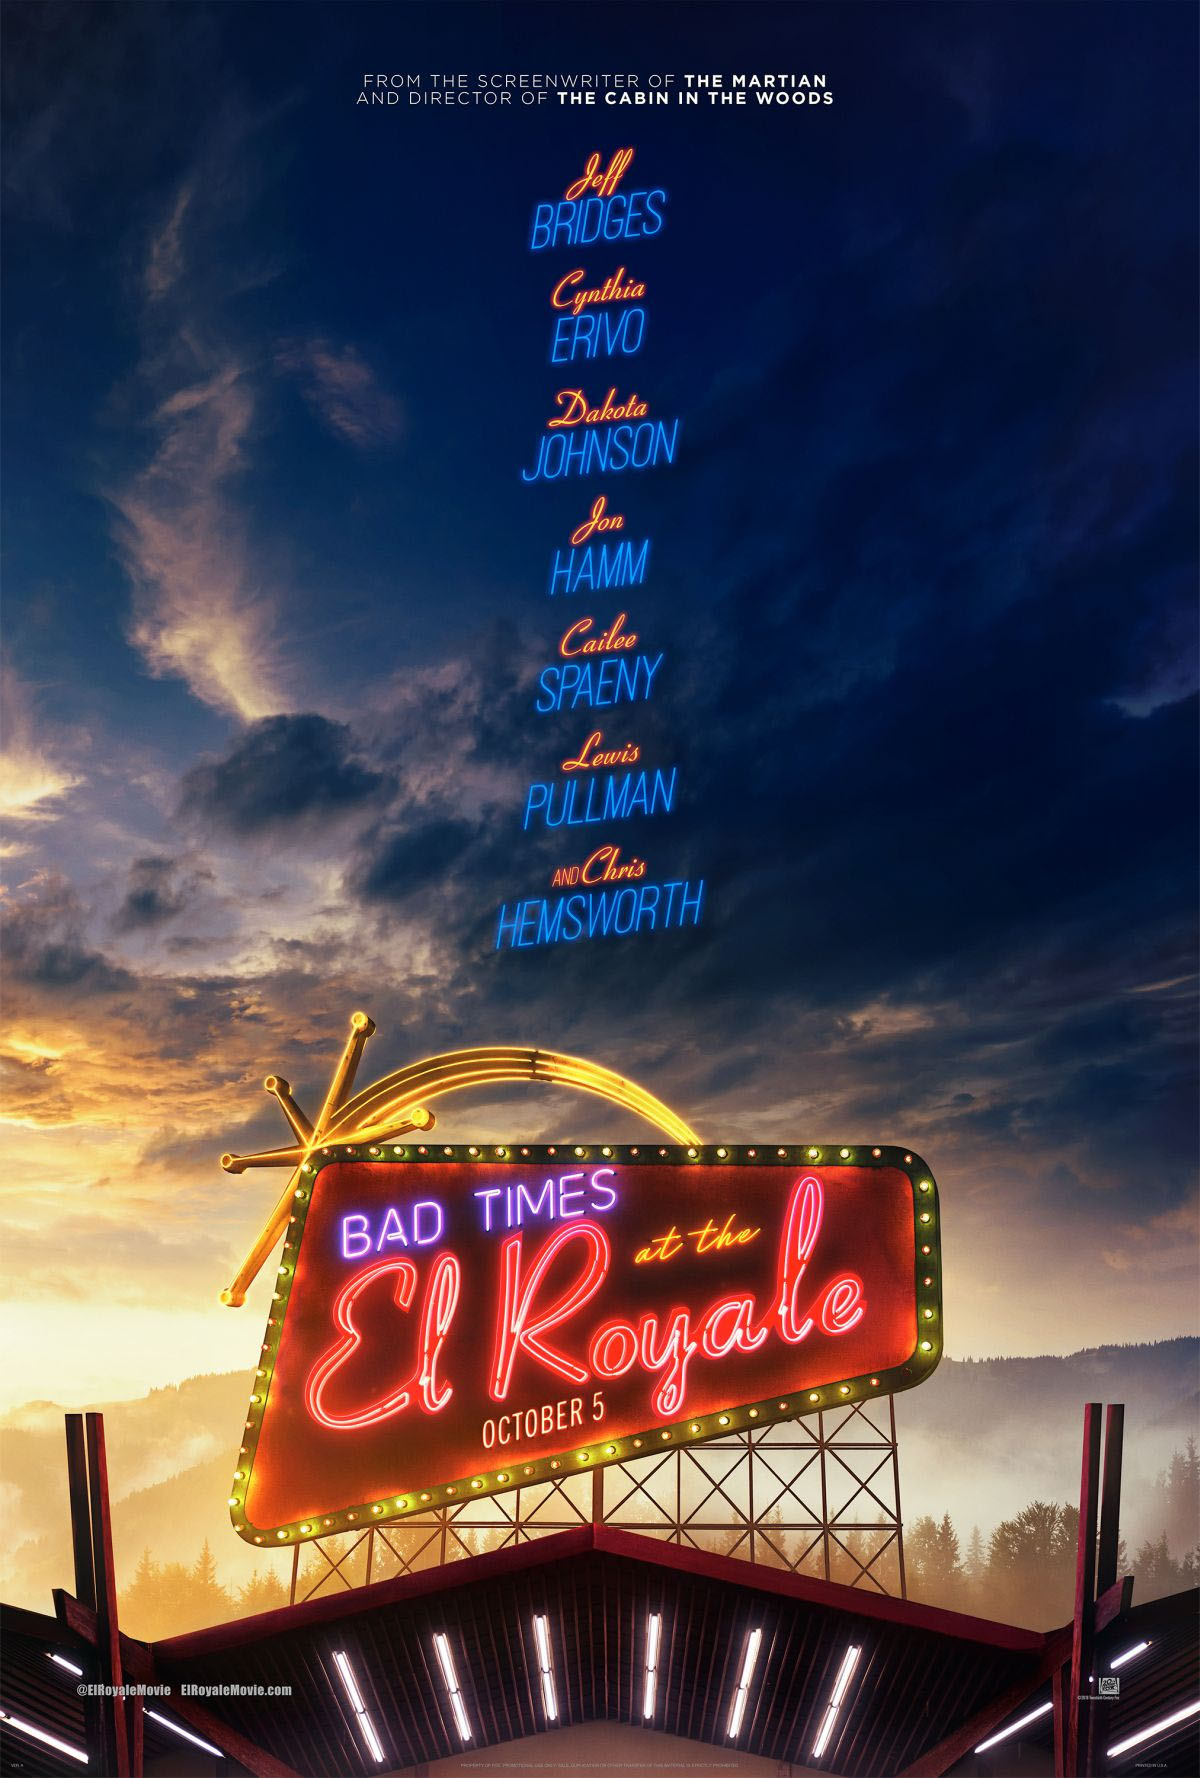 Bad Times at the El Royale – A Priest, A Hippie, A Singer, and a Salesman Walk Into a Hotel Bar…